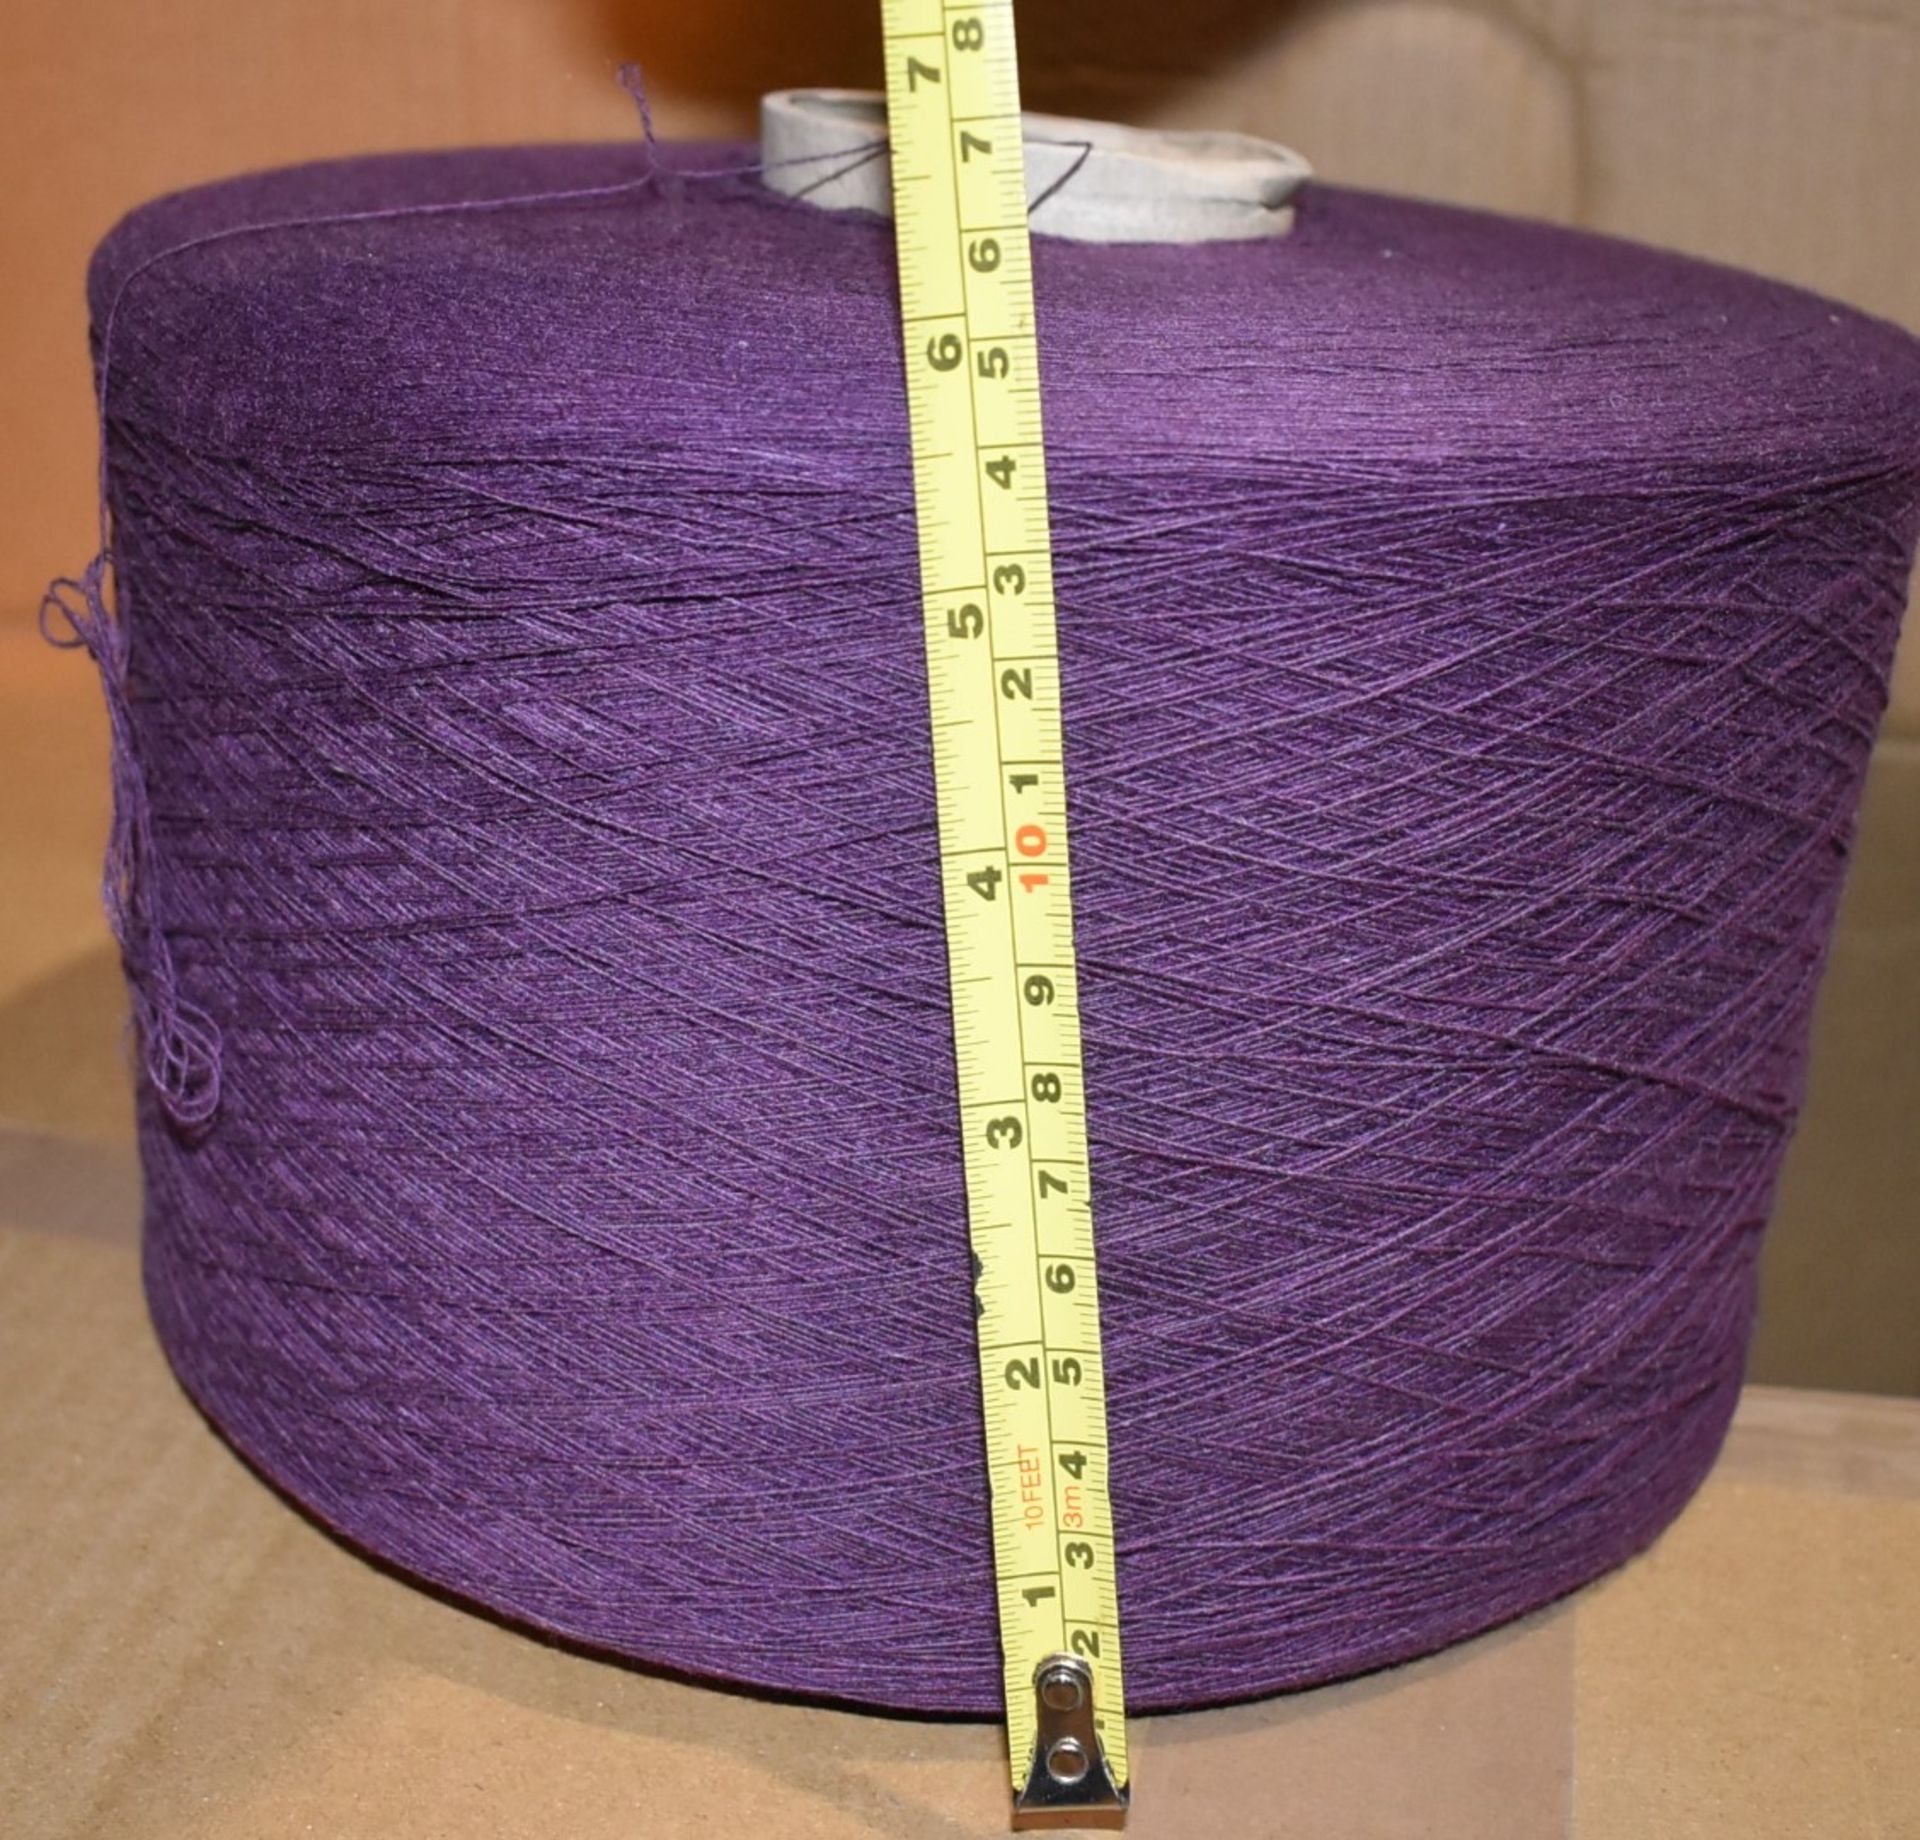 6 x Cones of 1/13 MicroCotton Knitting Yarn - Colour: Purple - Approx Weight: 2,300g - New Stock - Image 8 of 9